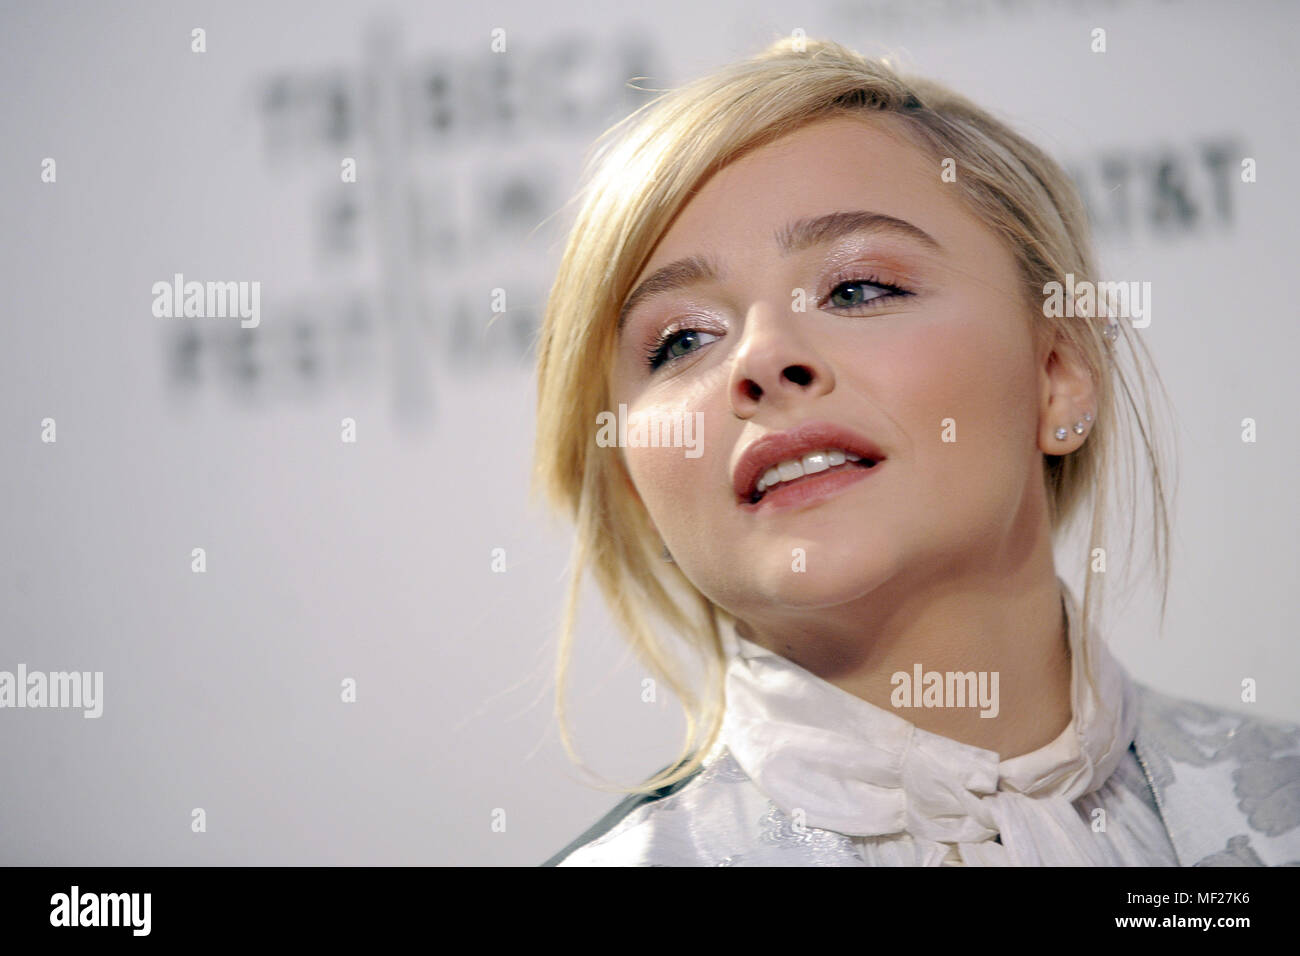 A closer look at Chloë Grace Moretz movies (2021/05/16)- Tickets to Movies  in Theaters, Broadway Shows, London Theatre & More